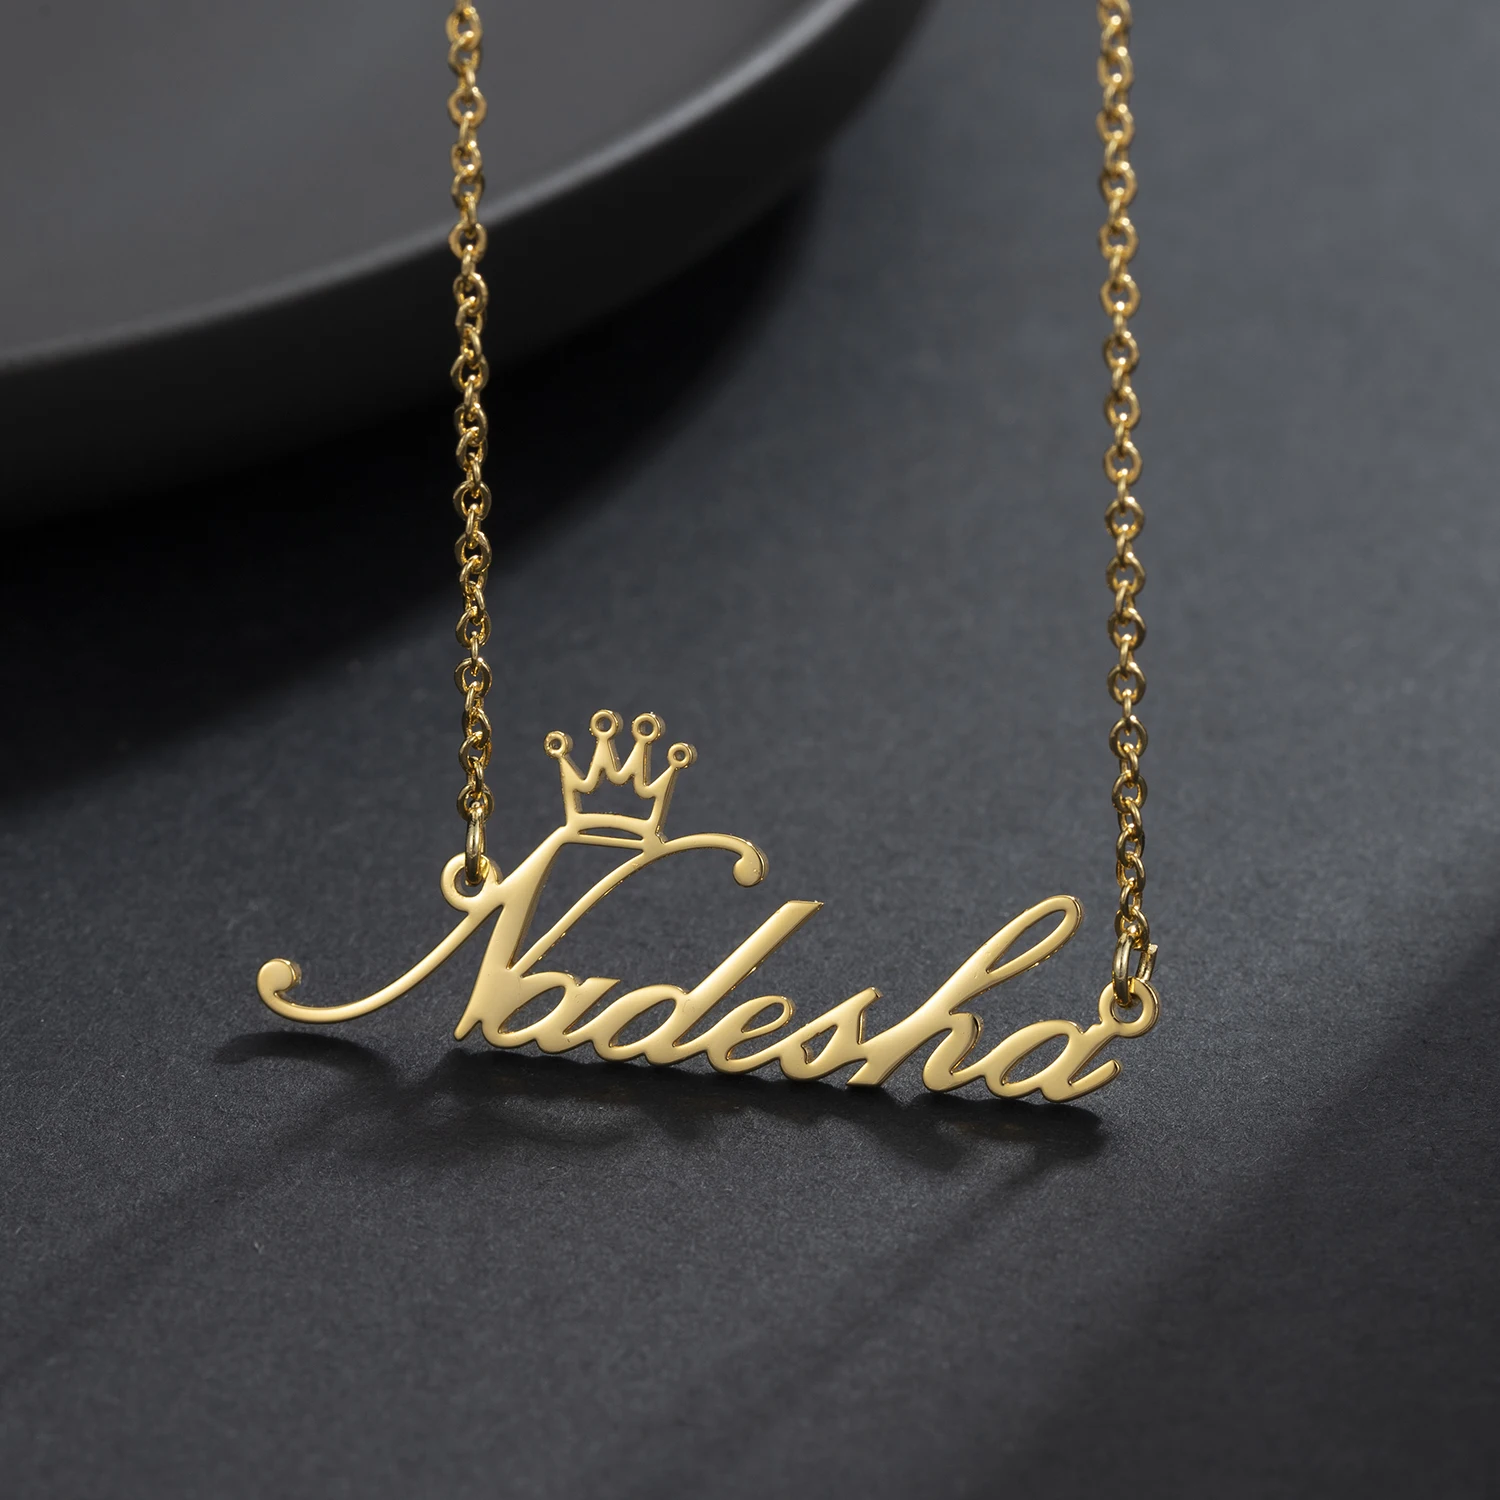 Customized Necklace Name Personalized 14K Gilded Stainless Steel Jewelry Pendant Crown Nameplate Link Necklace For Women Gifts